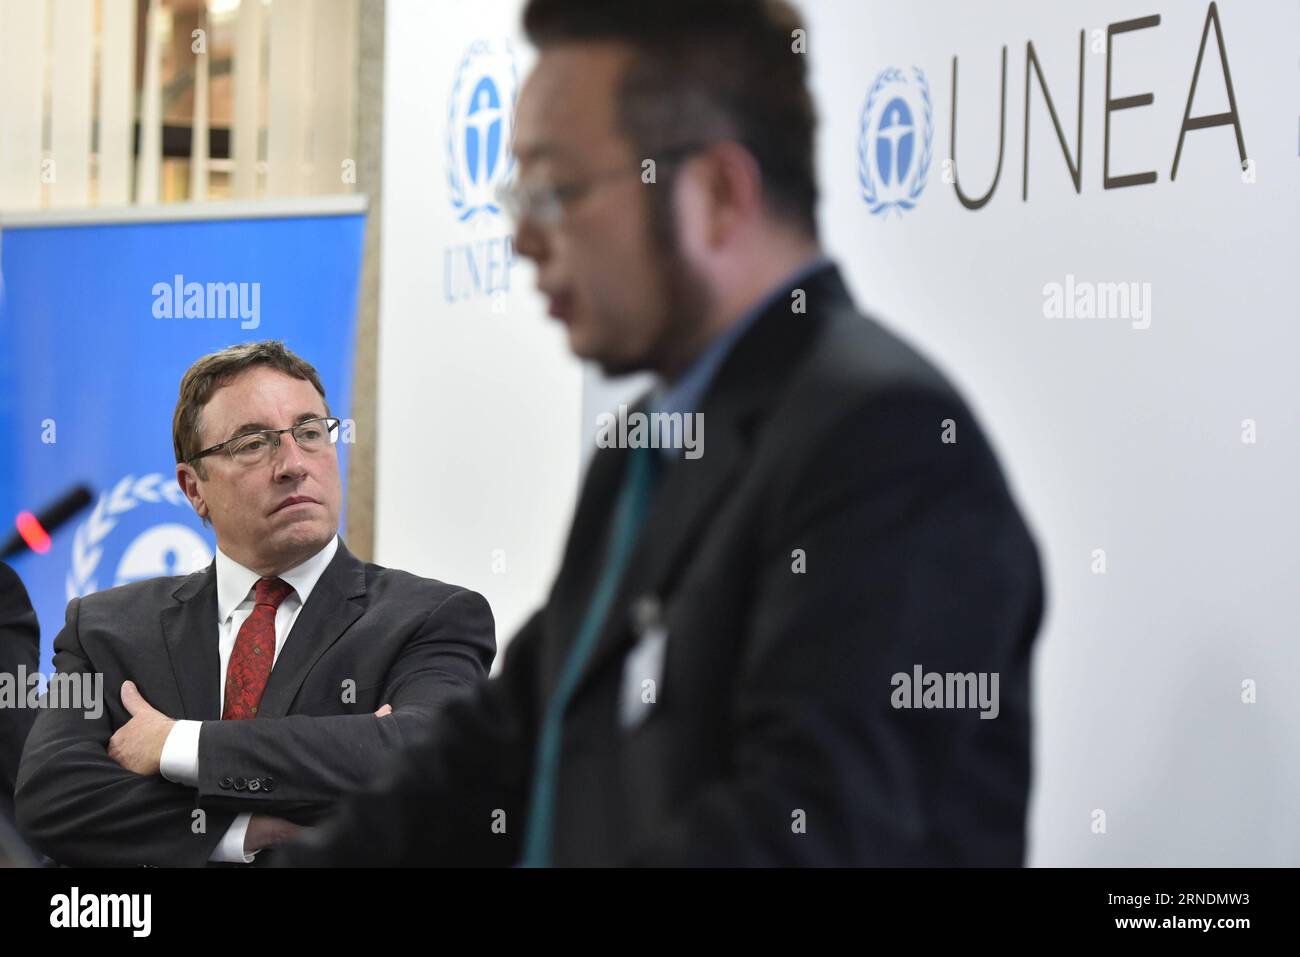 (160524)-- NAIROBI, May 24, 2016 -- UNEP Executive Director Achim Steiner (L) listens to He Kebin, Dean at the School of Environment at the Tsingua University in China, who is introducing A Review of Air Pollution Control in Beijing: 1998-2013 during a press conference of the ongoing second edition of the United Nations Environment Assembly in Nairobi, Kenya, May 24, 2016. The United Nations Environmental Program (UNEP) has said there is need for governments to refashion policy interventions aimed at reducing air pollution. ) KENYA-NAIROBI-UNITED NATIONS ENVIRONMENT ASSEMBLY-AIR POLLUTION CONT Stock Photo